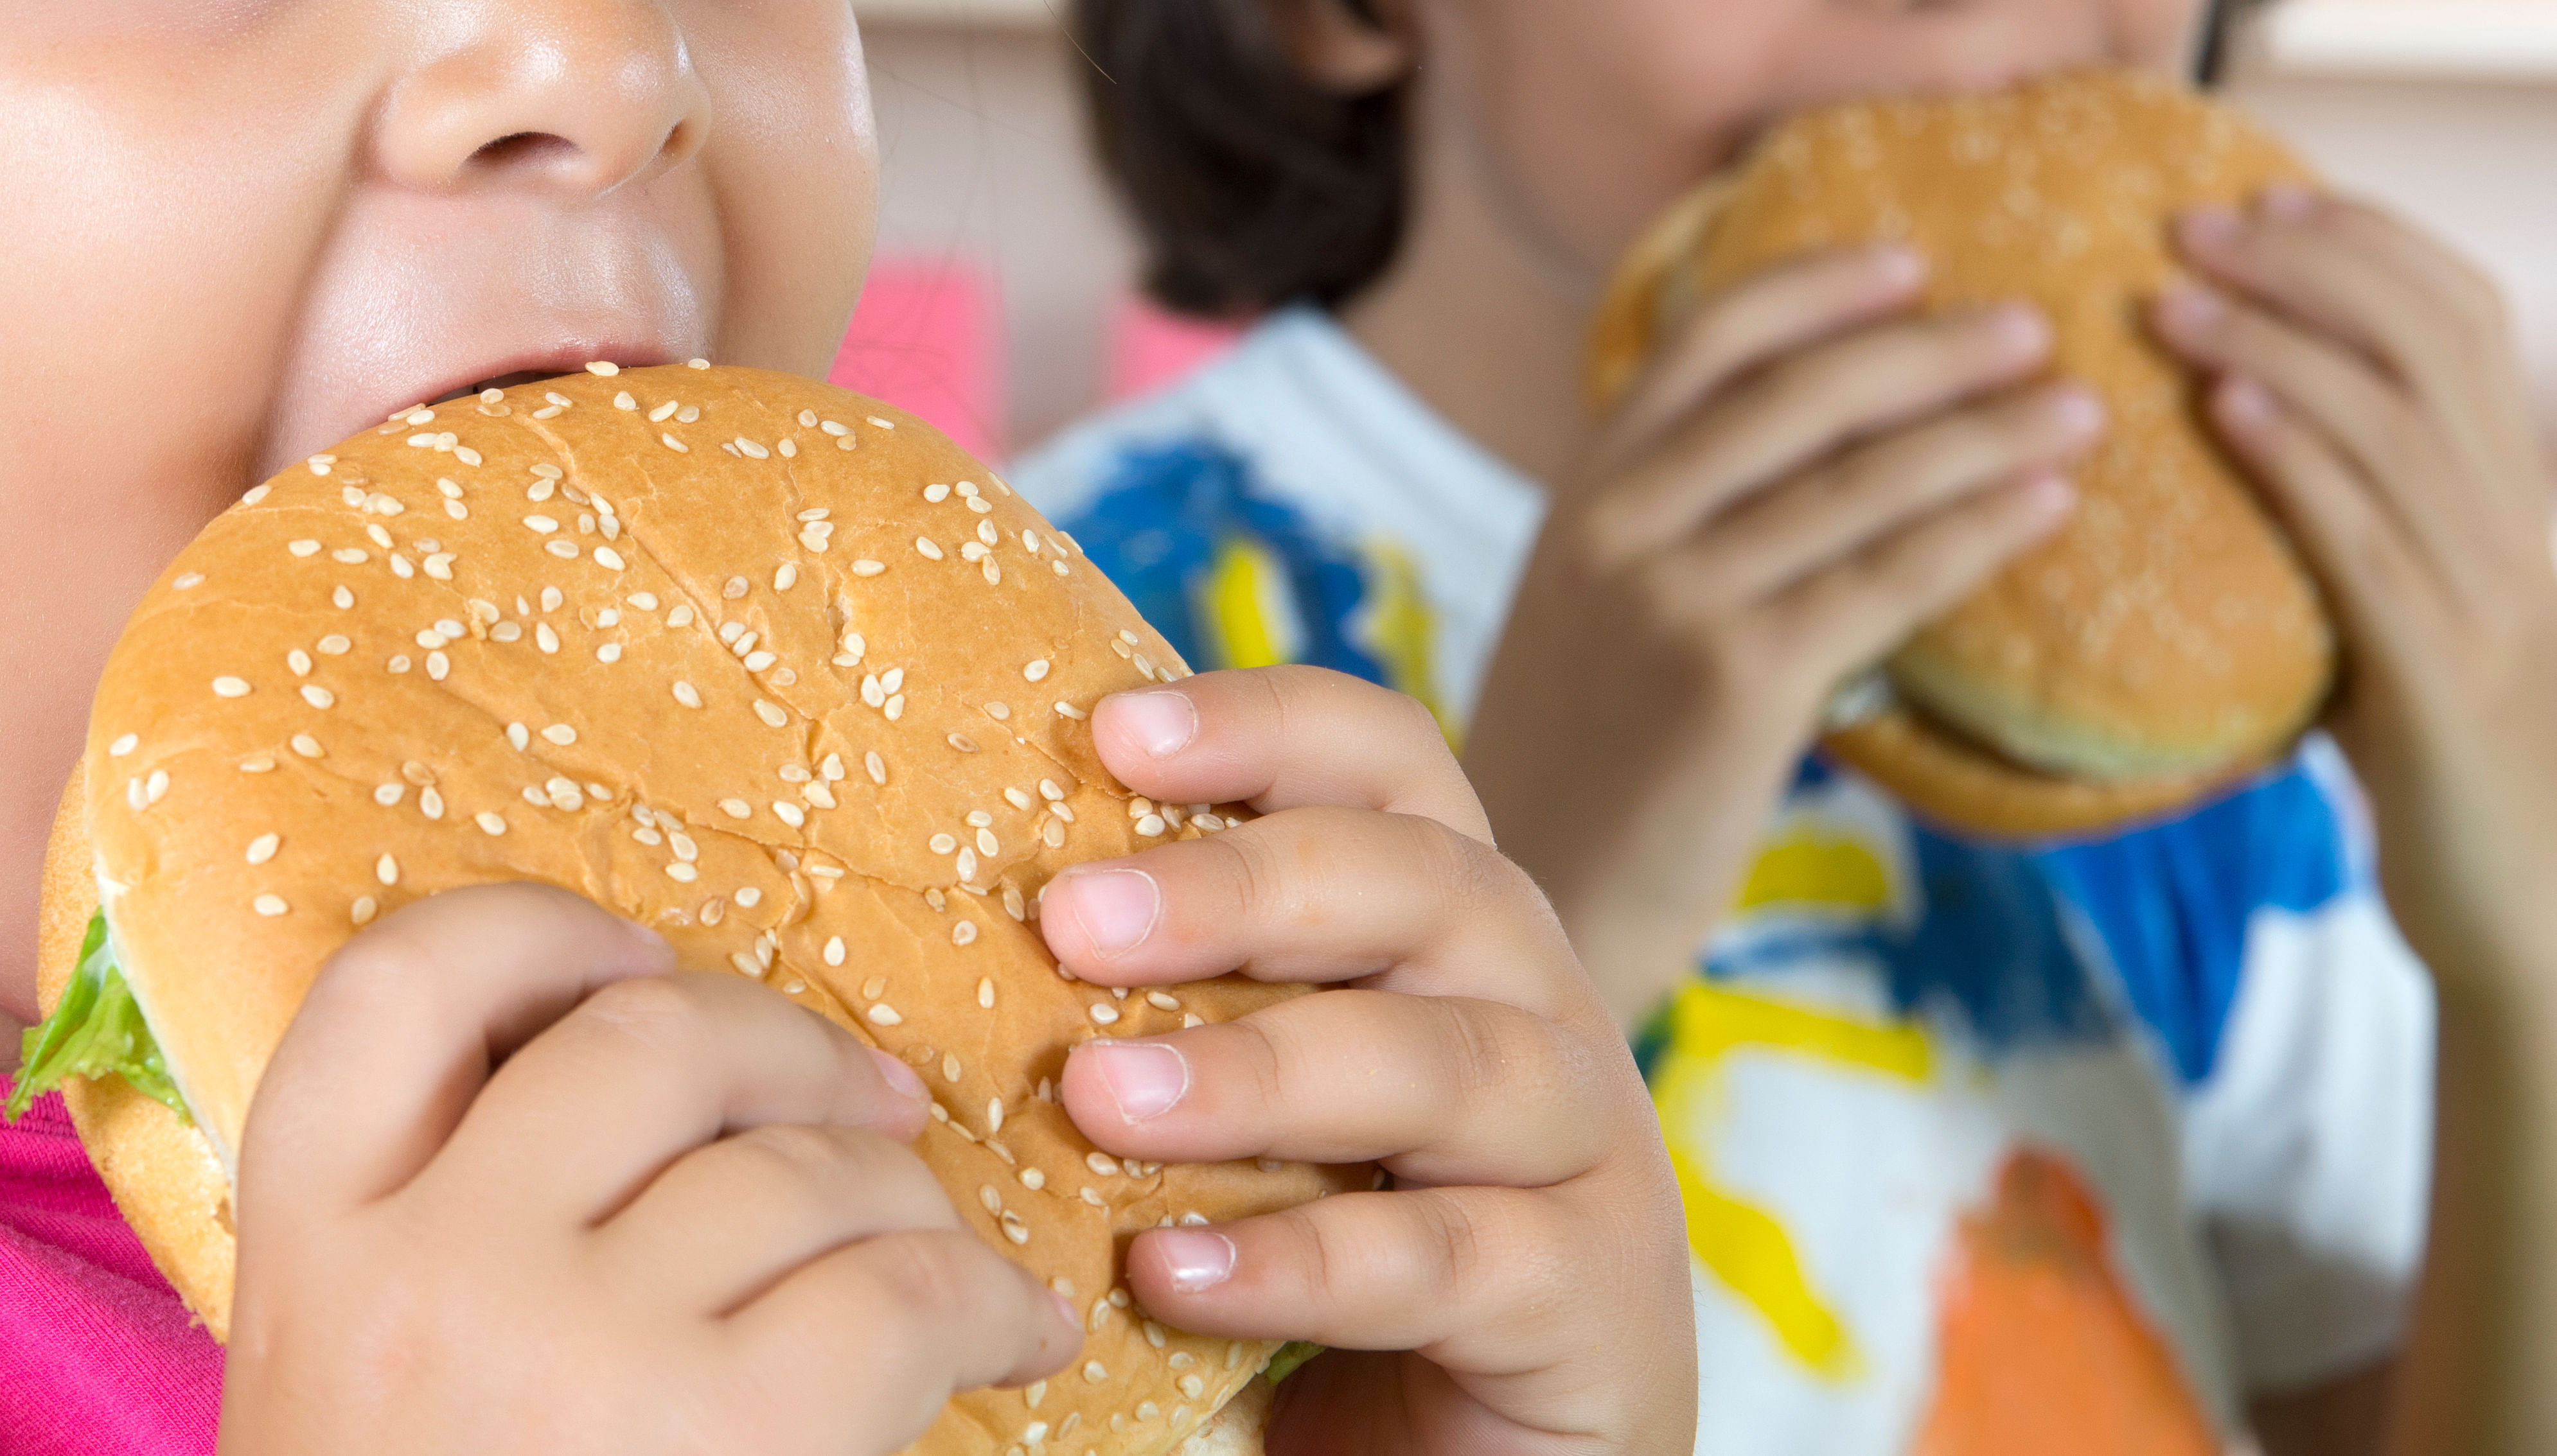 Ultra-processed foods are major contributors to childhood obesity. In Karnataka, 3.2% of children under five years are overweight.  